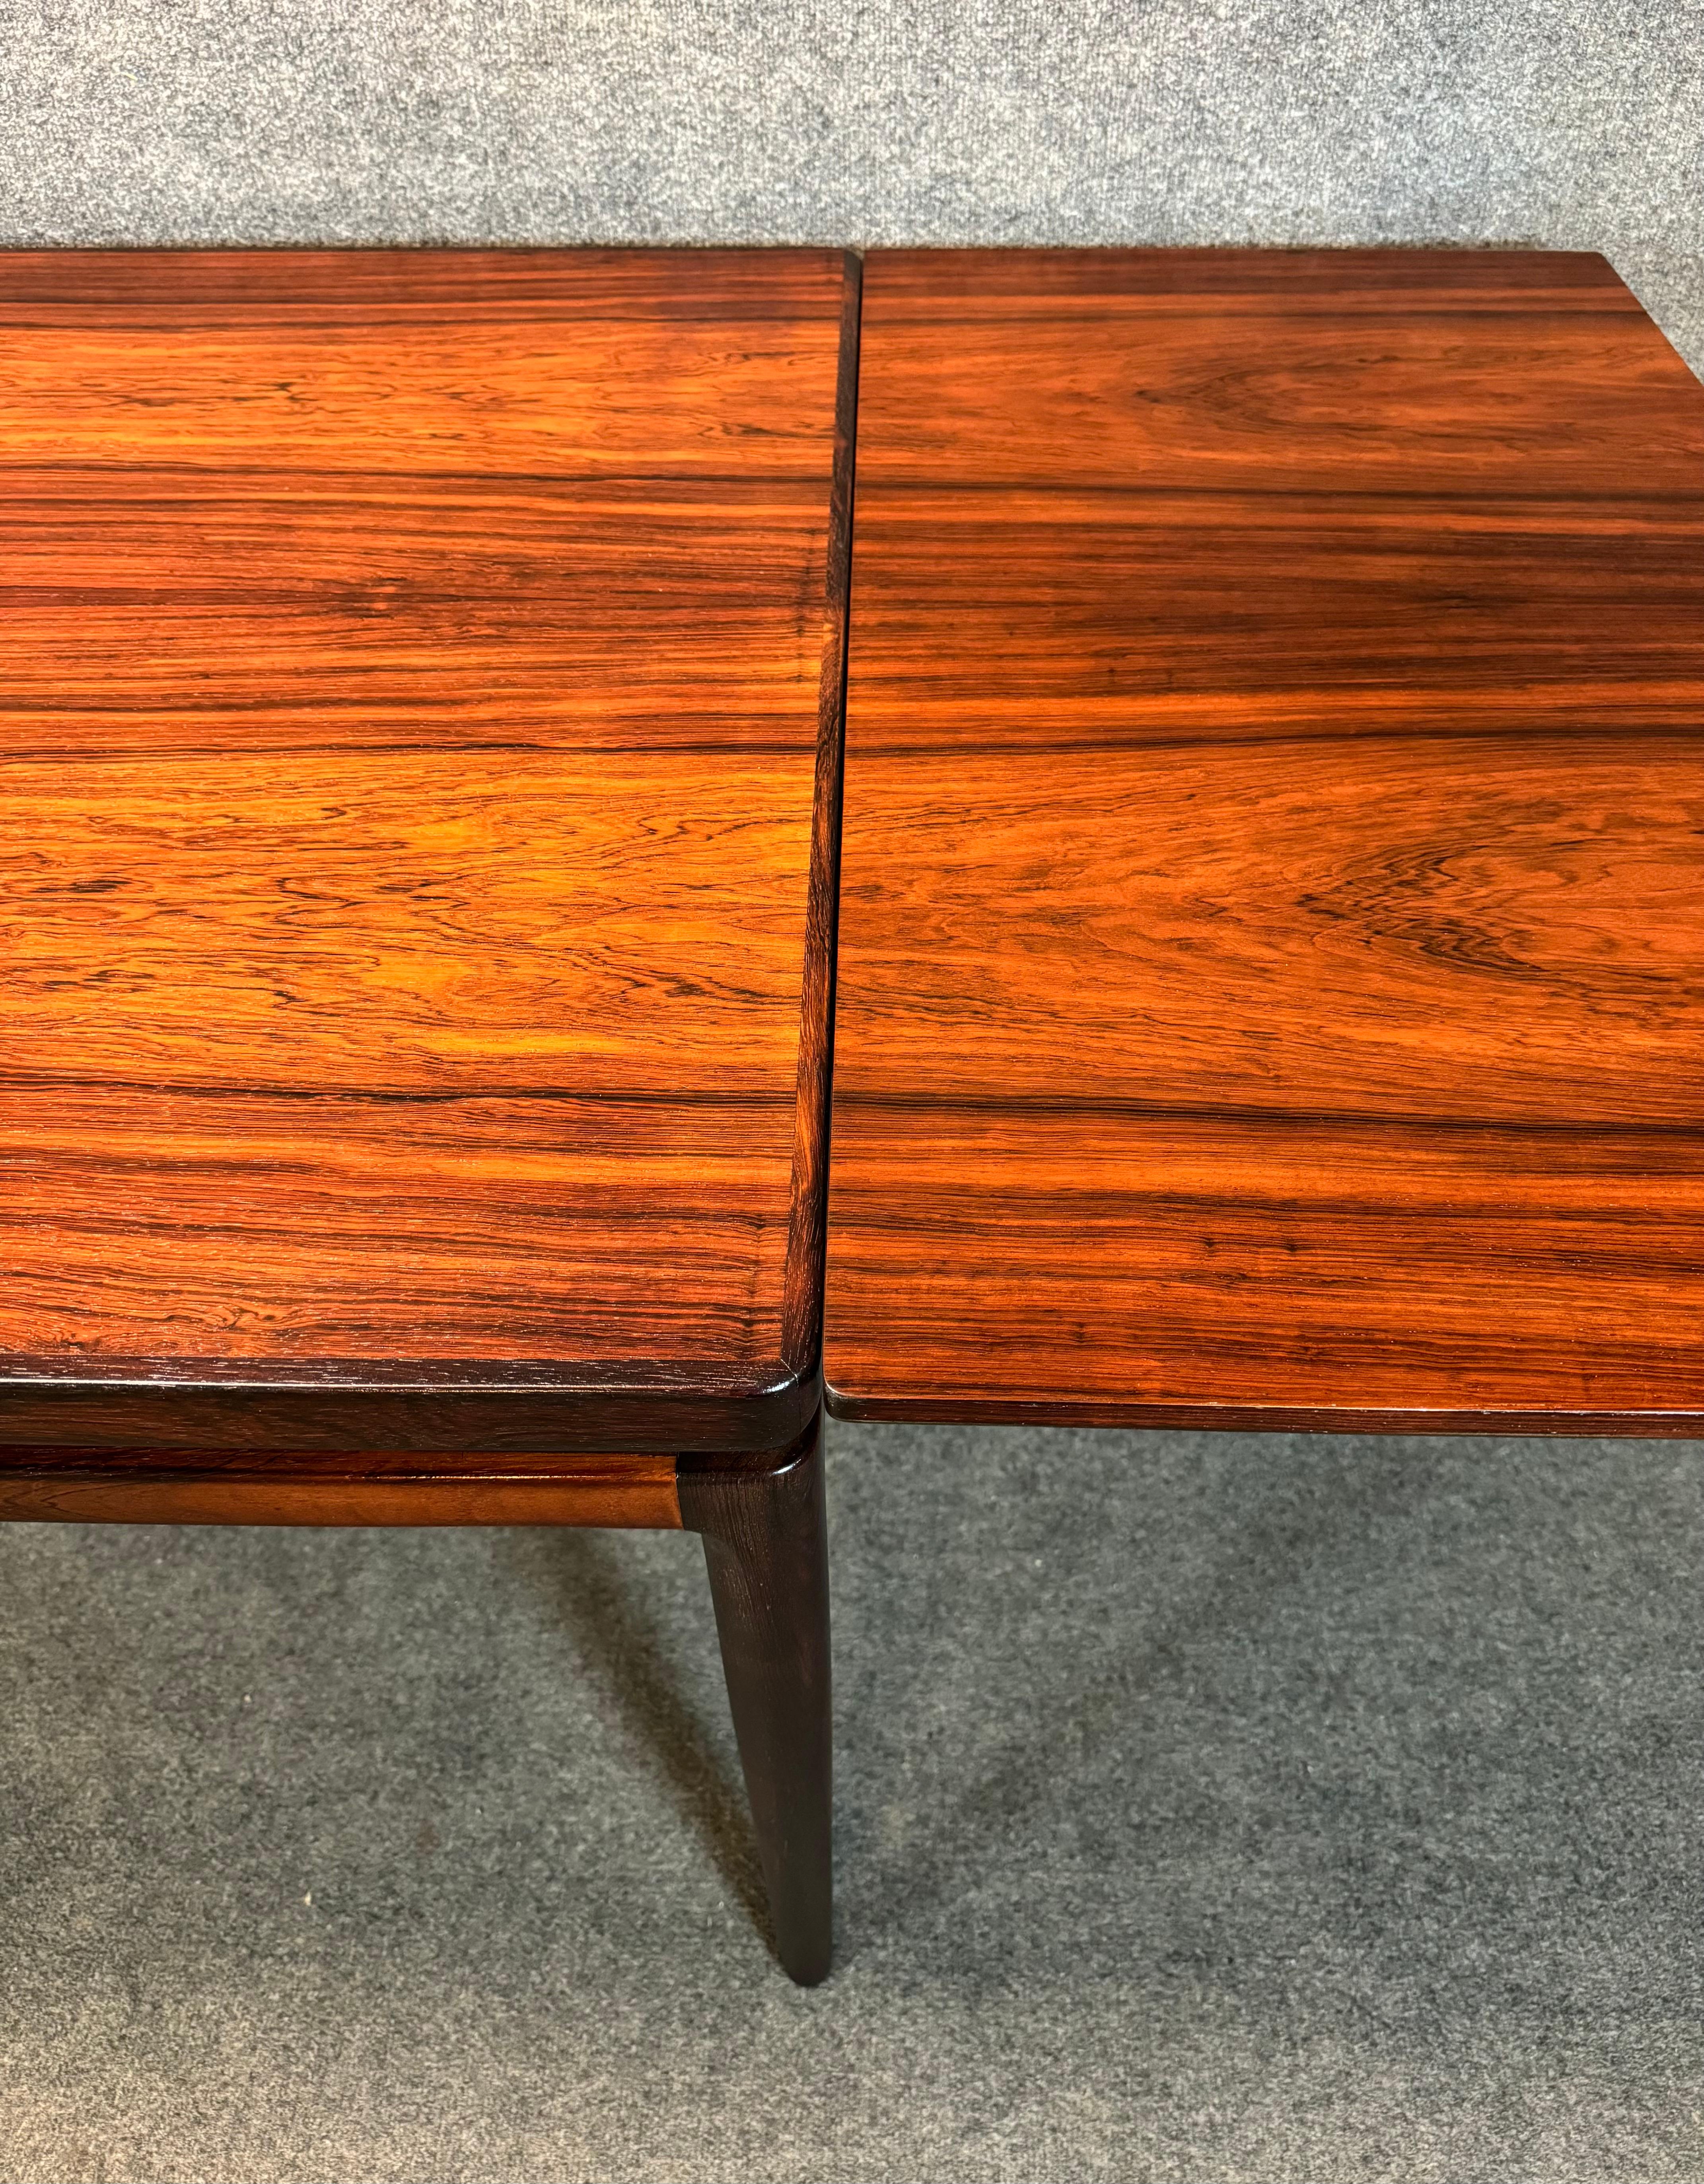 Vintage Danish Mid Century Modern Rosewood Dining Table by Johannes Andersen For Sale 2